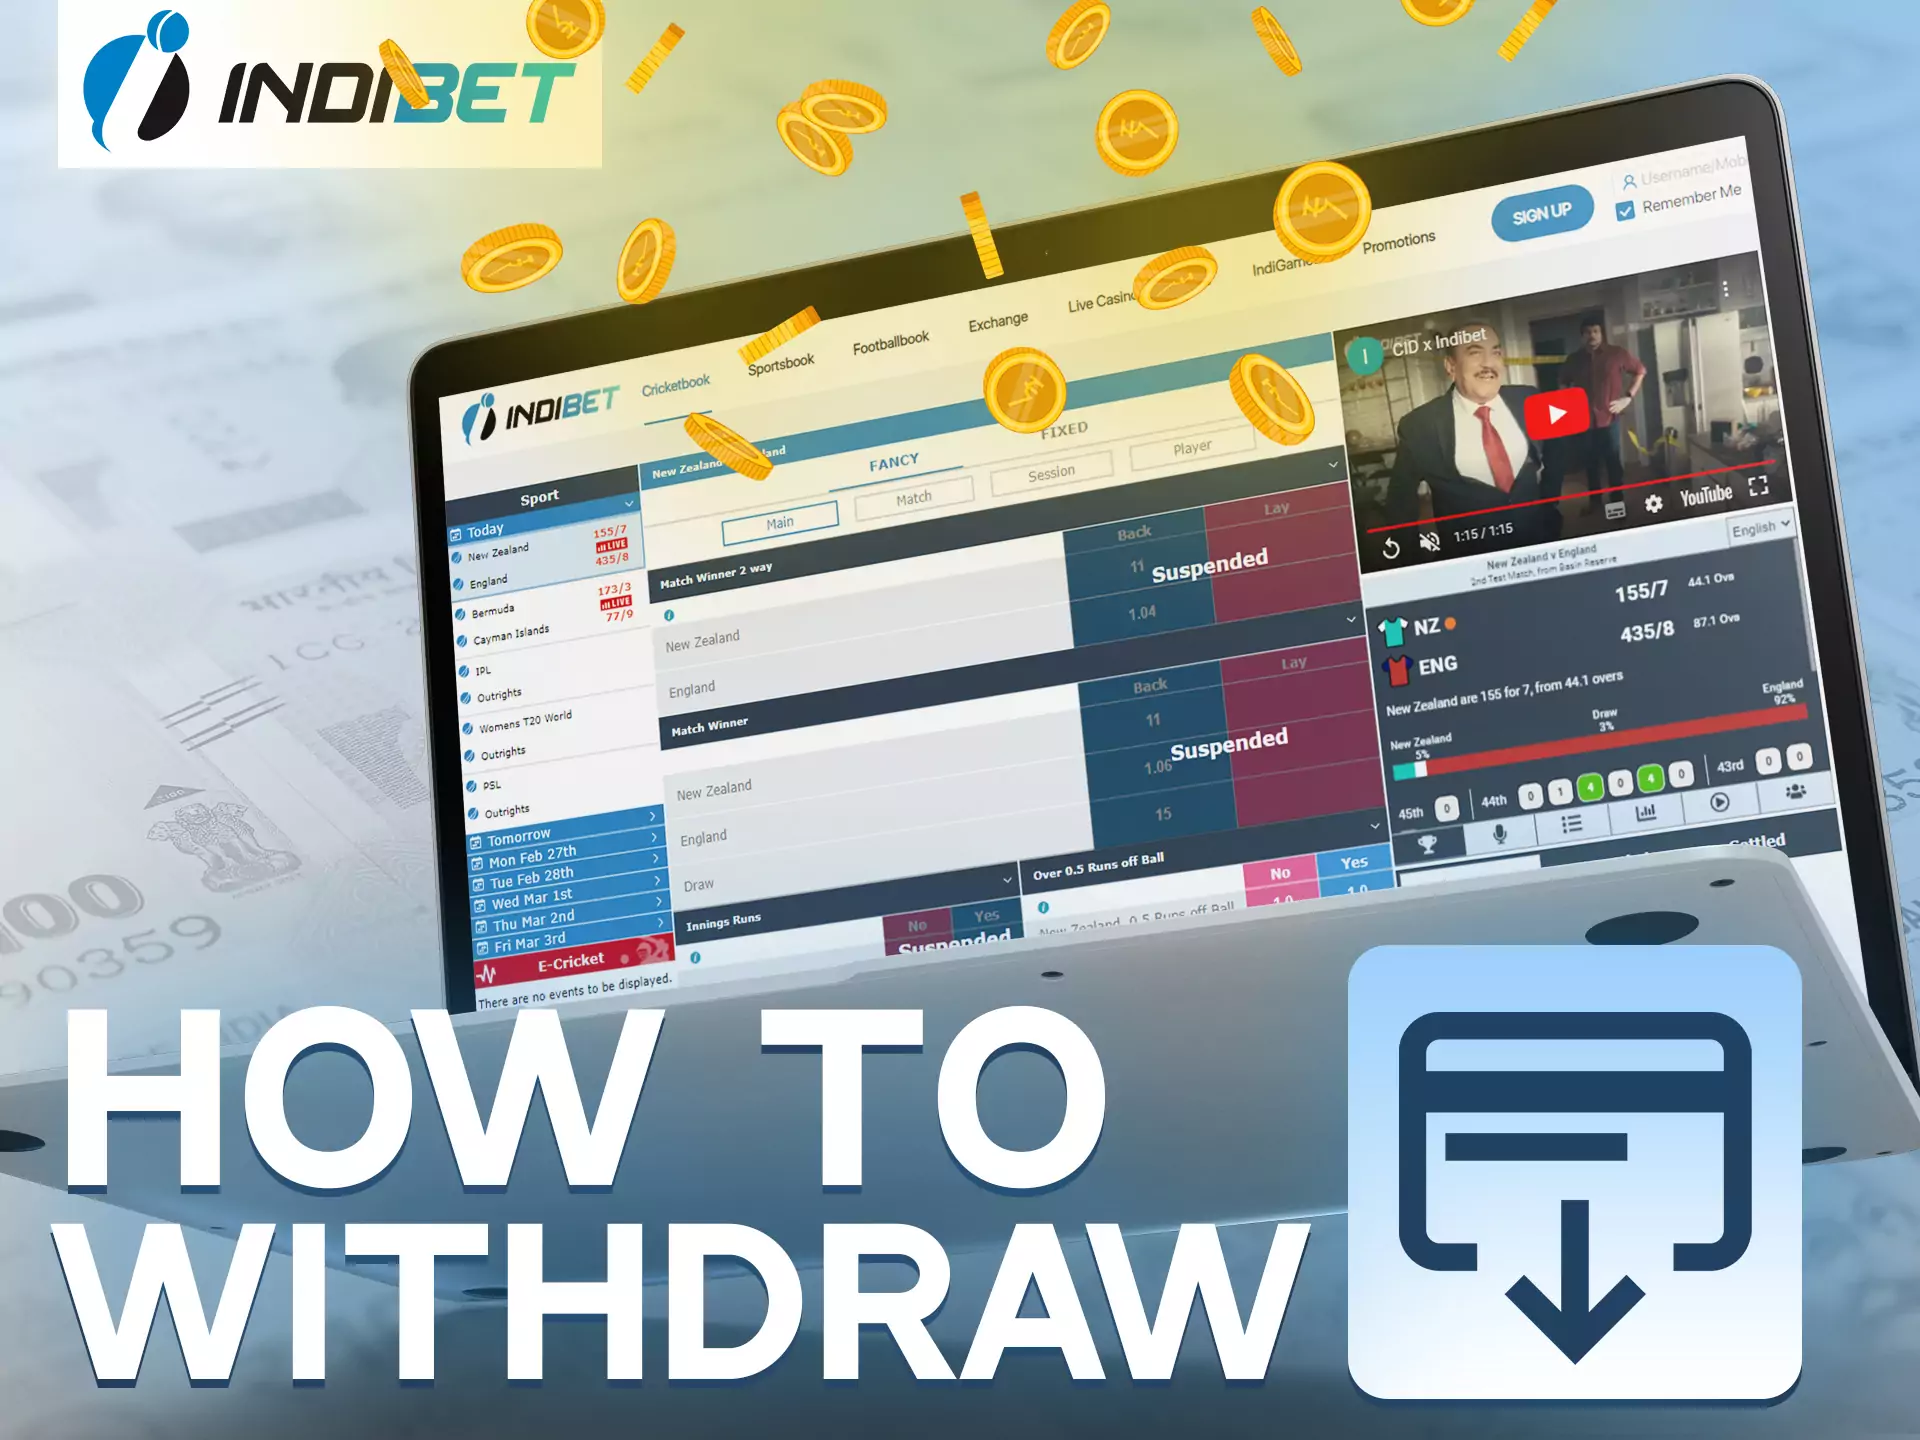 With Indibet you can always easily withdraw your winning money.